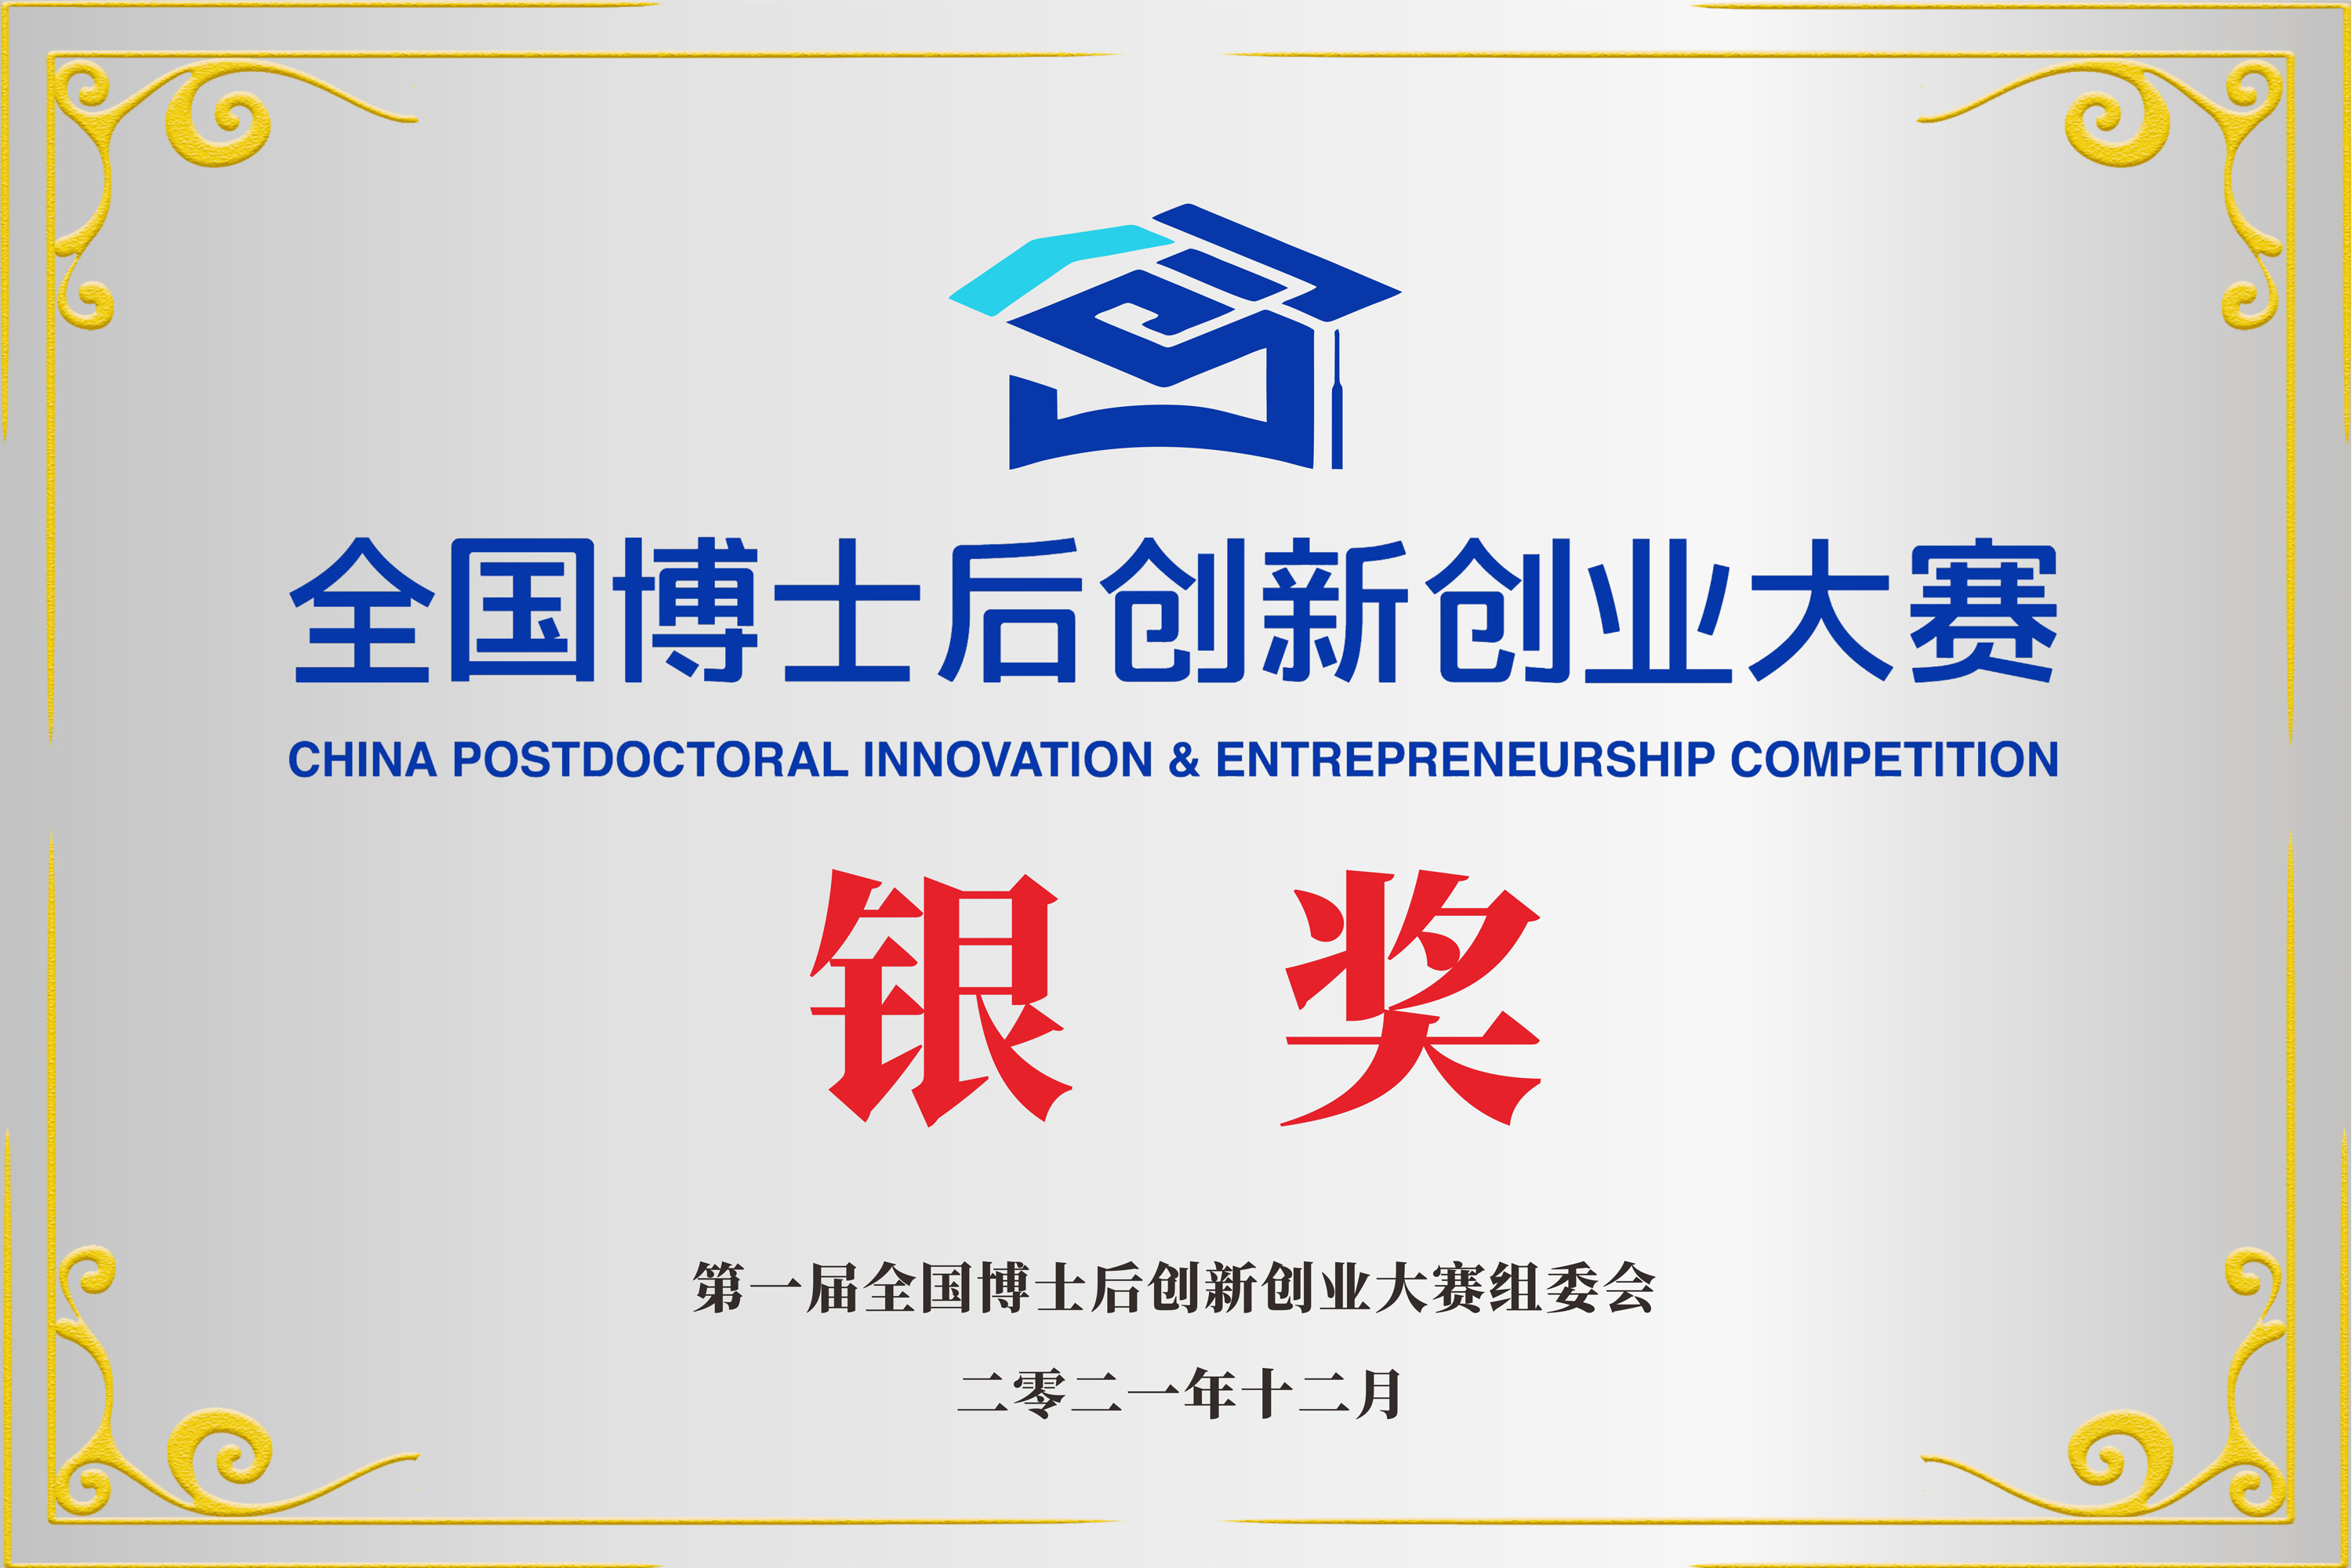 Silver Award of National Postdoctoral Innovation and Entrepreneurship Competition